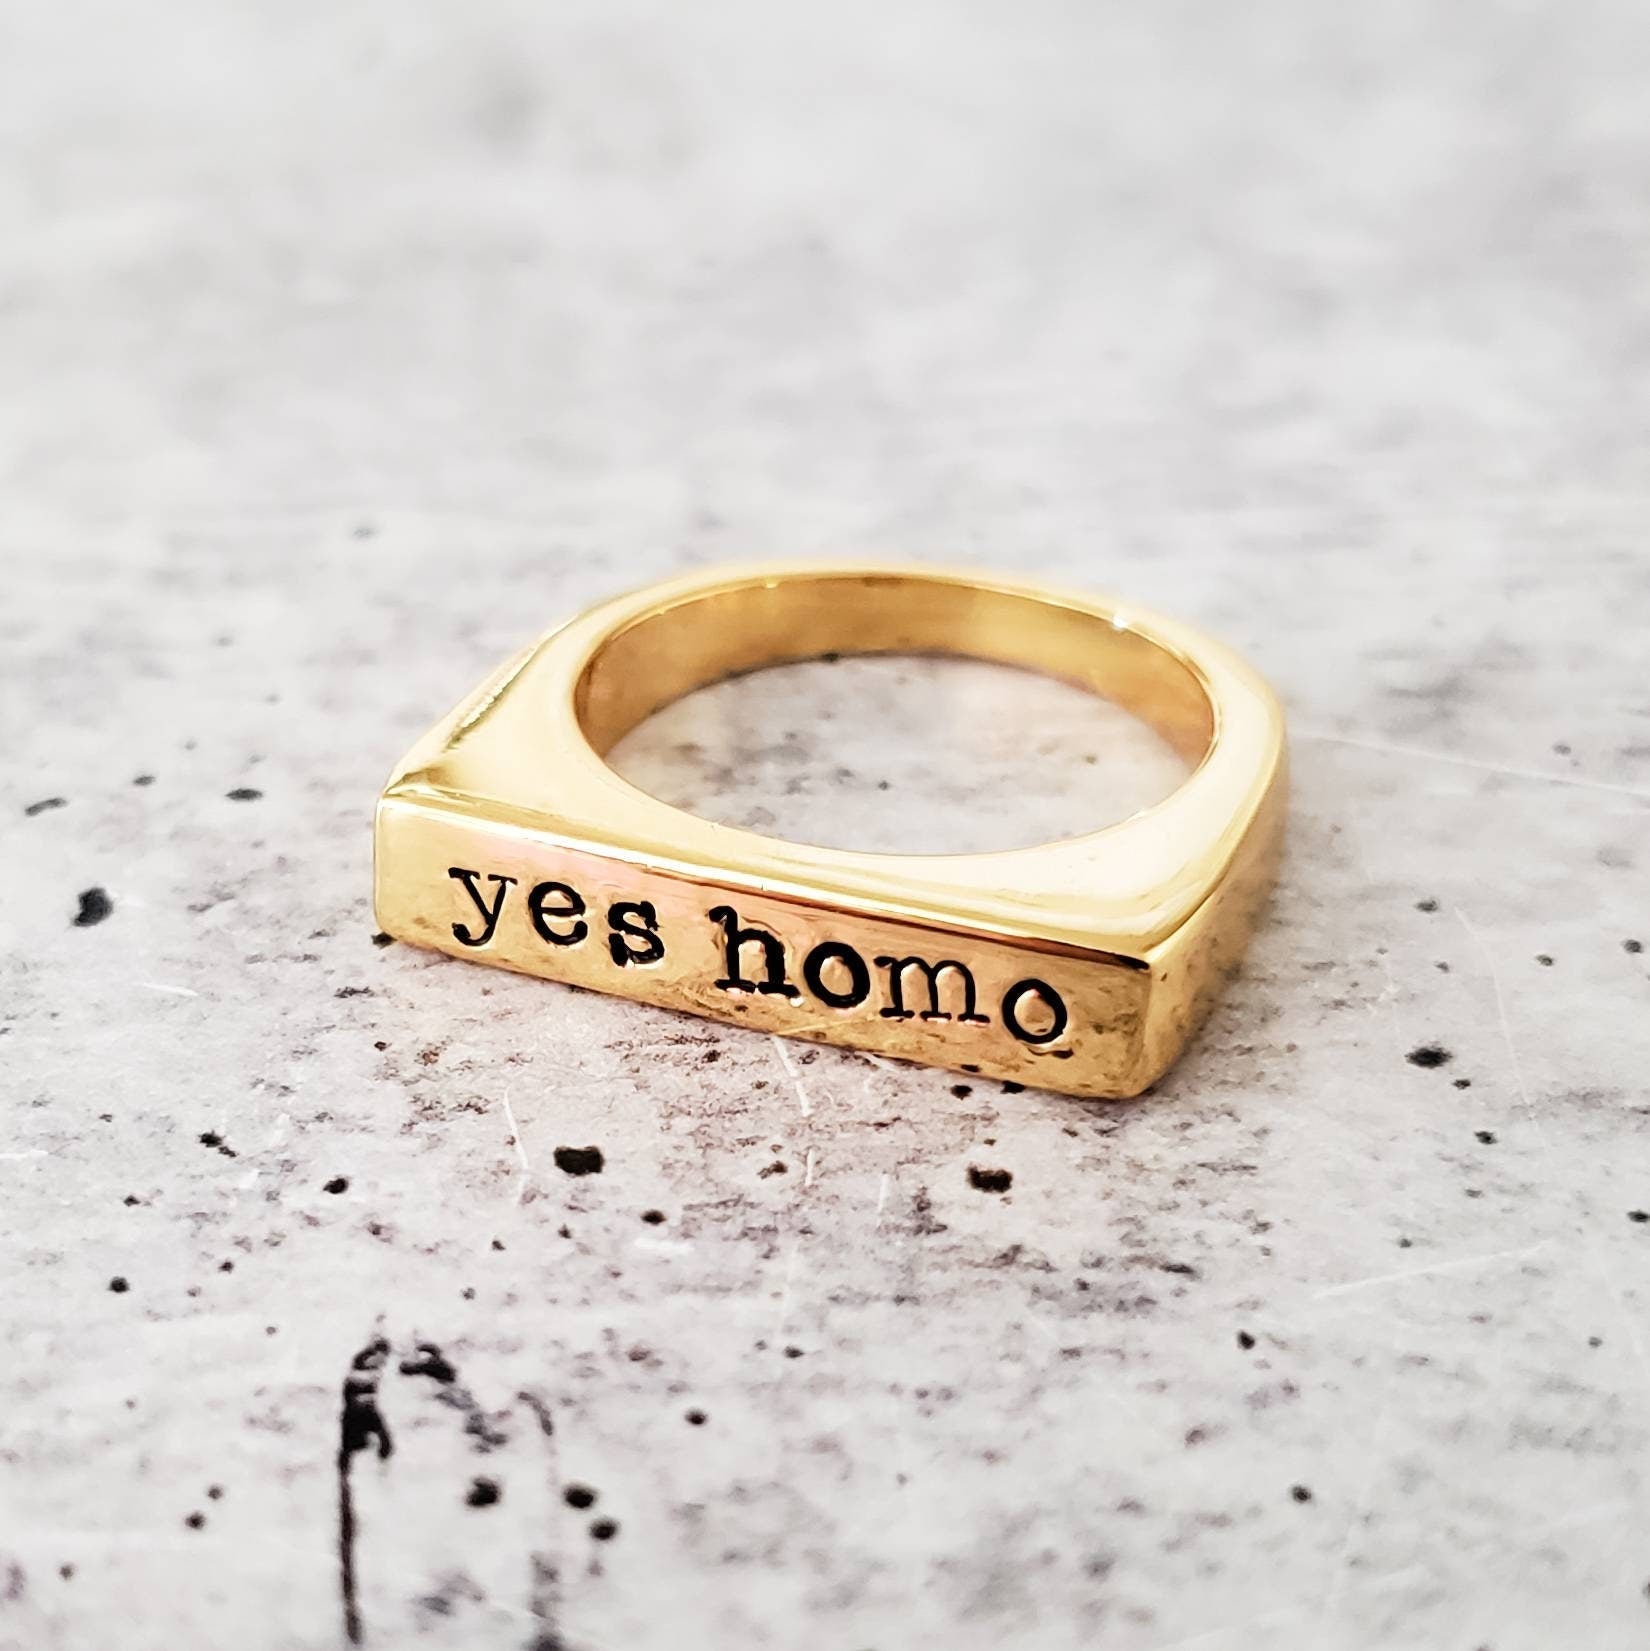 Yes Homo Pride Ring -  LGBTQIA Jewelry - Funny Gold Plated Ring for Gay Friend - Personalized for Non Binary Friend - Gay Pride Jewelry